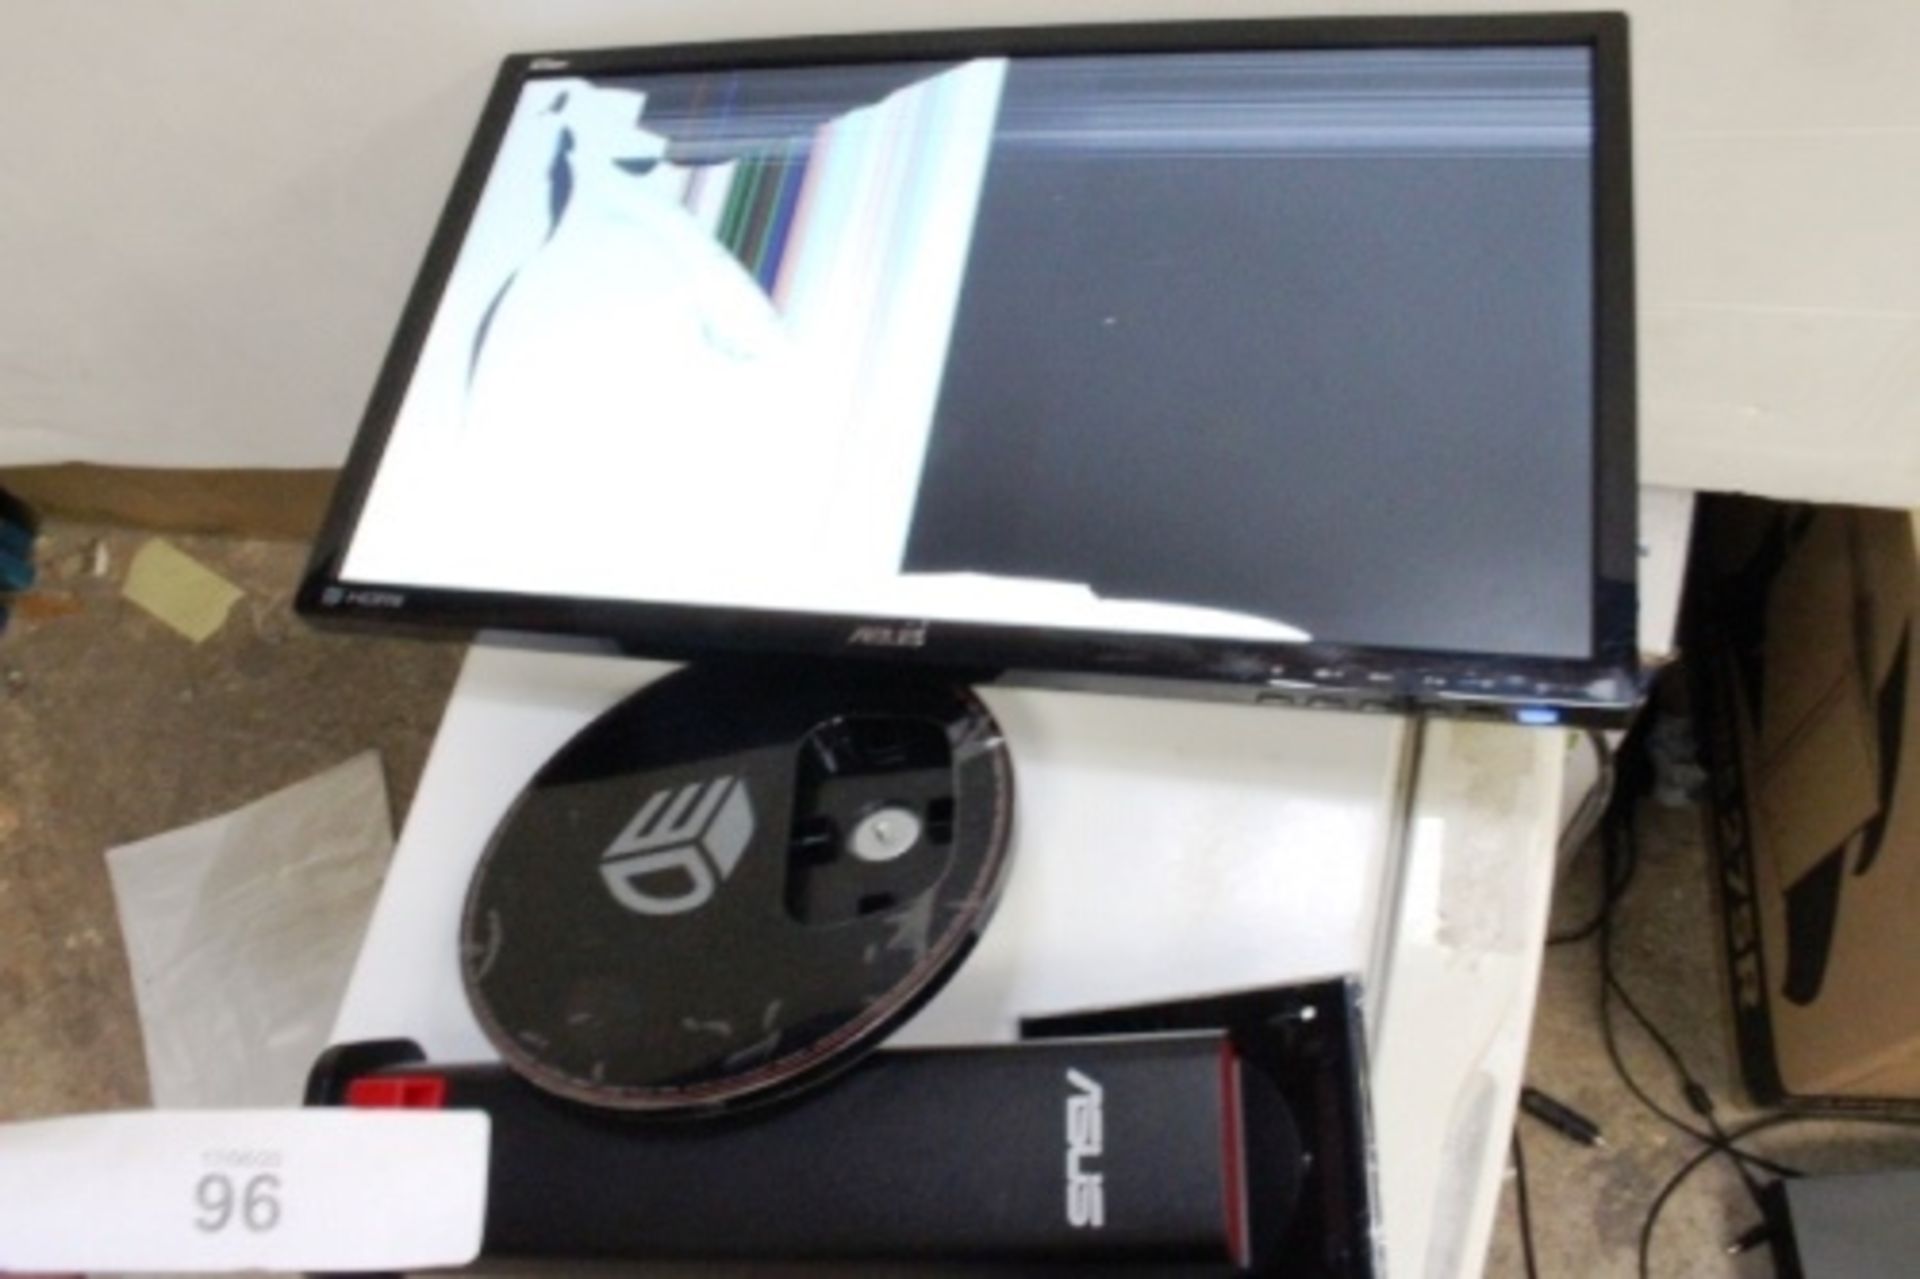 Asus VG248 wide screen monitor, cracked screen - Spares and repairs (ES6) - Image 2 of 2